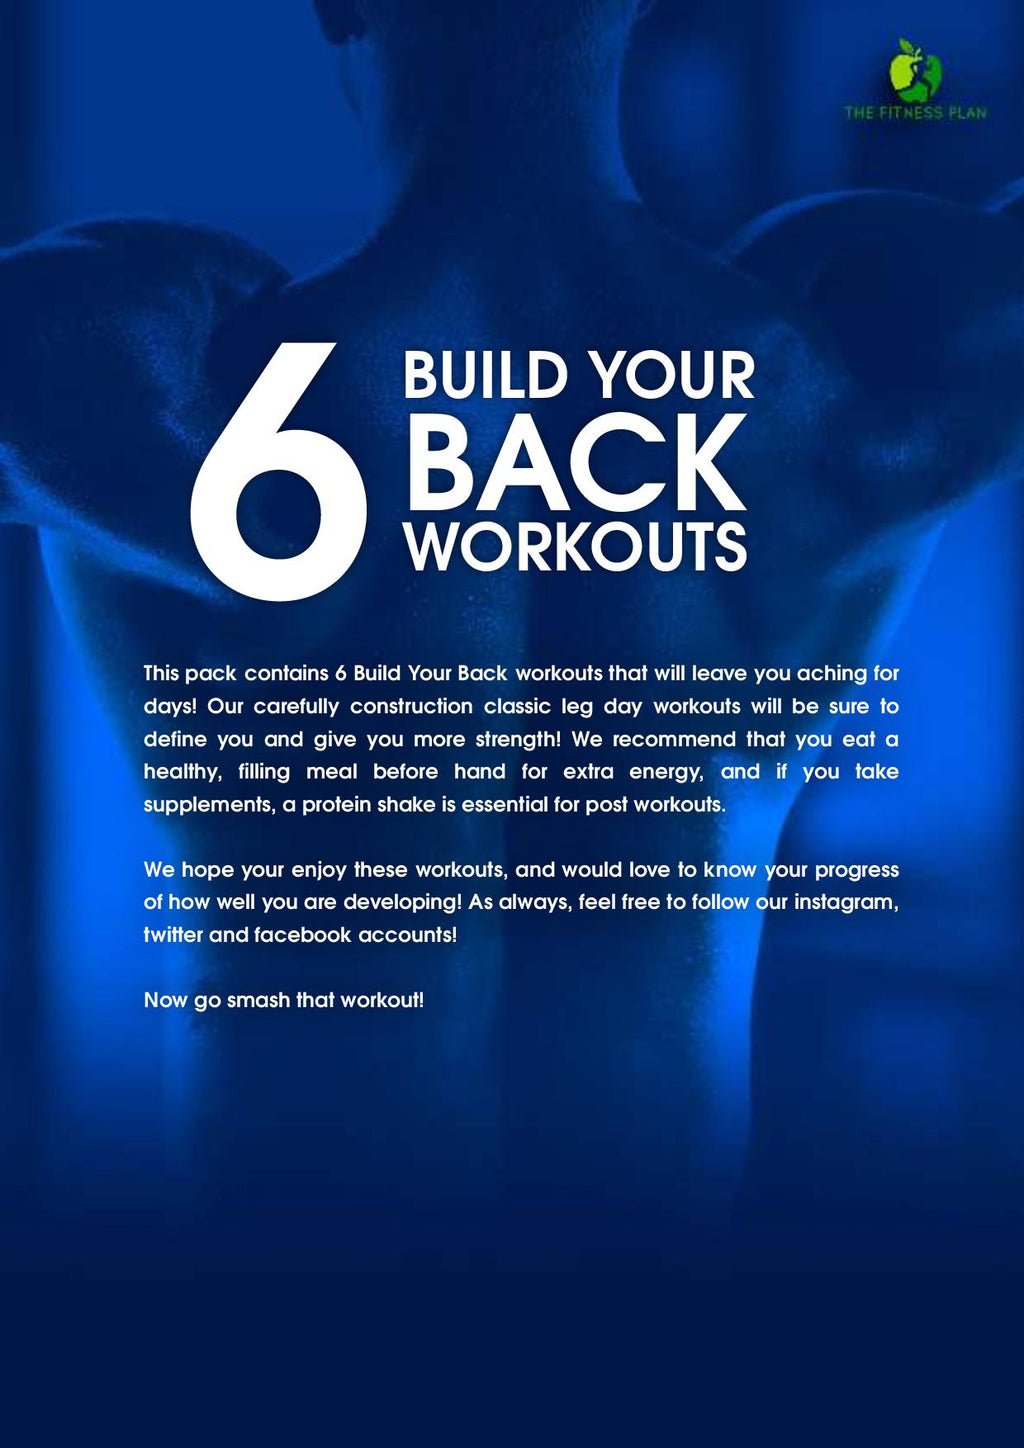 6 Build Your Back Workouts